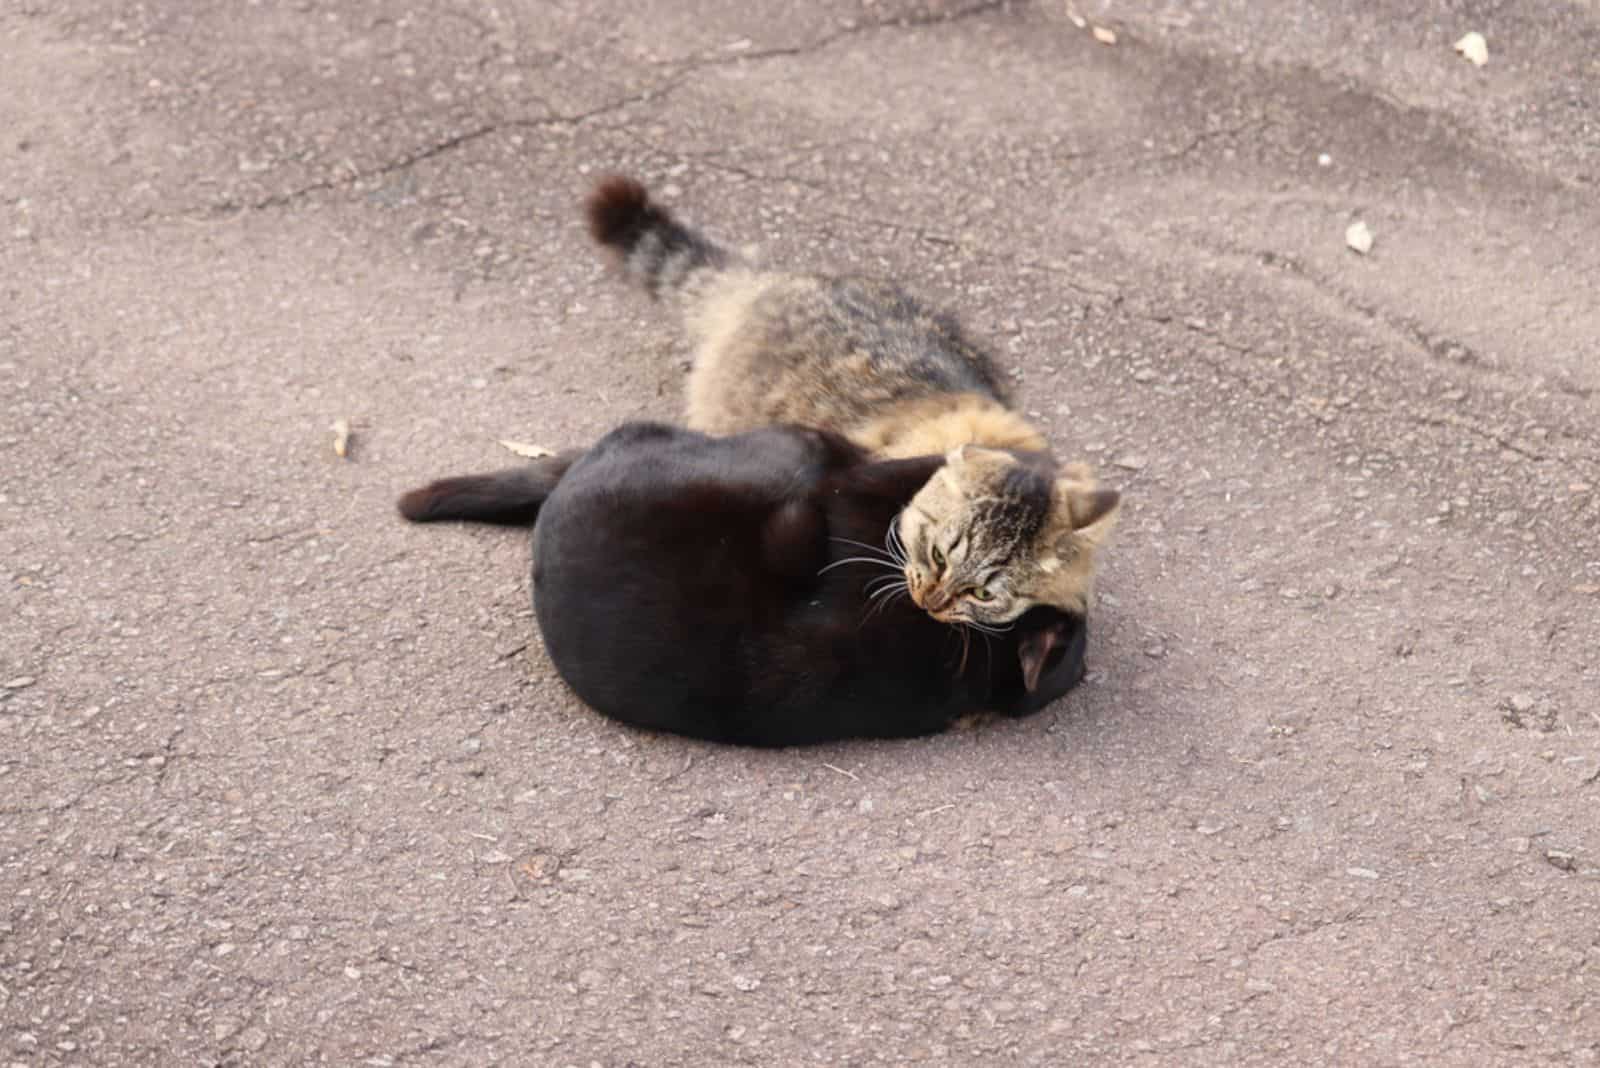 two cats bite each other's necks in the street